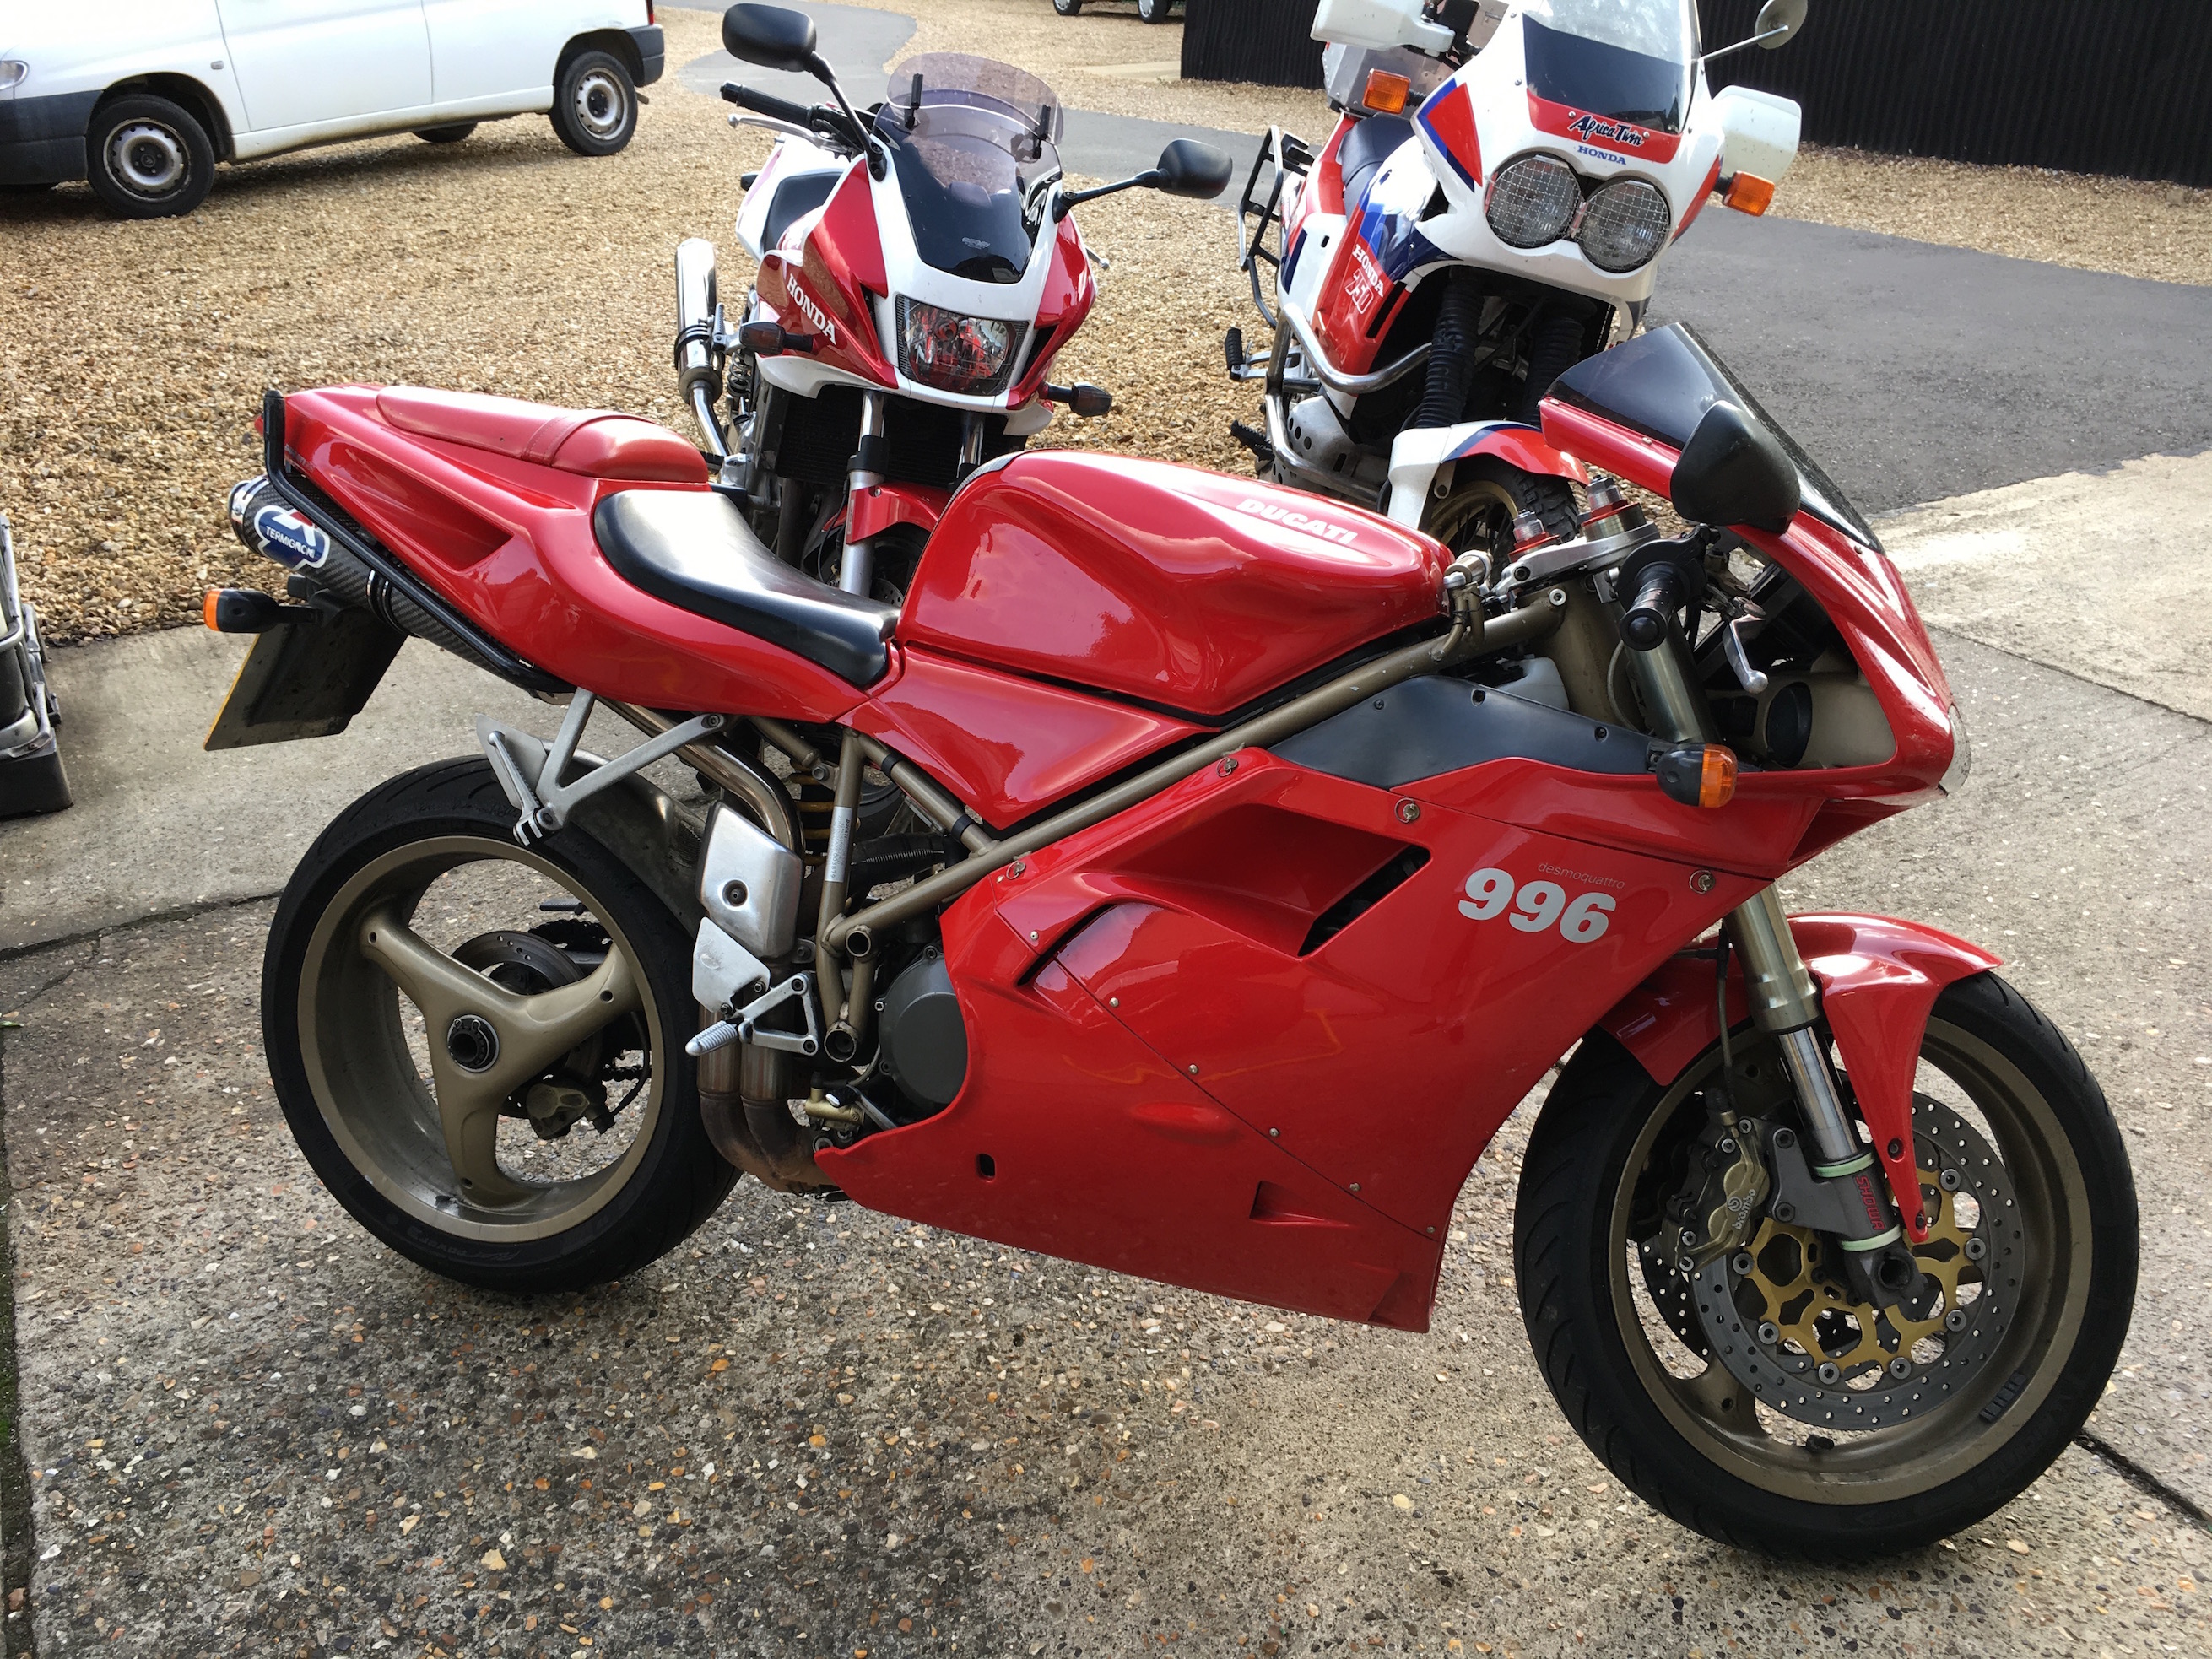 Ducati 996 top end sort out after long-range overheat…